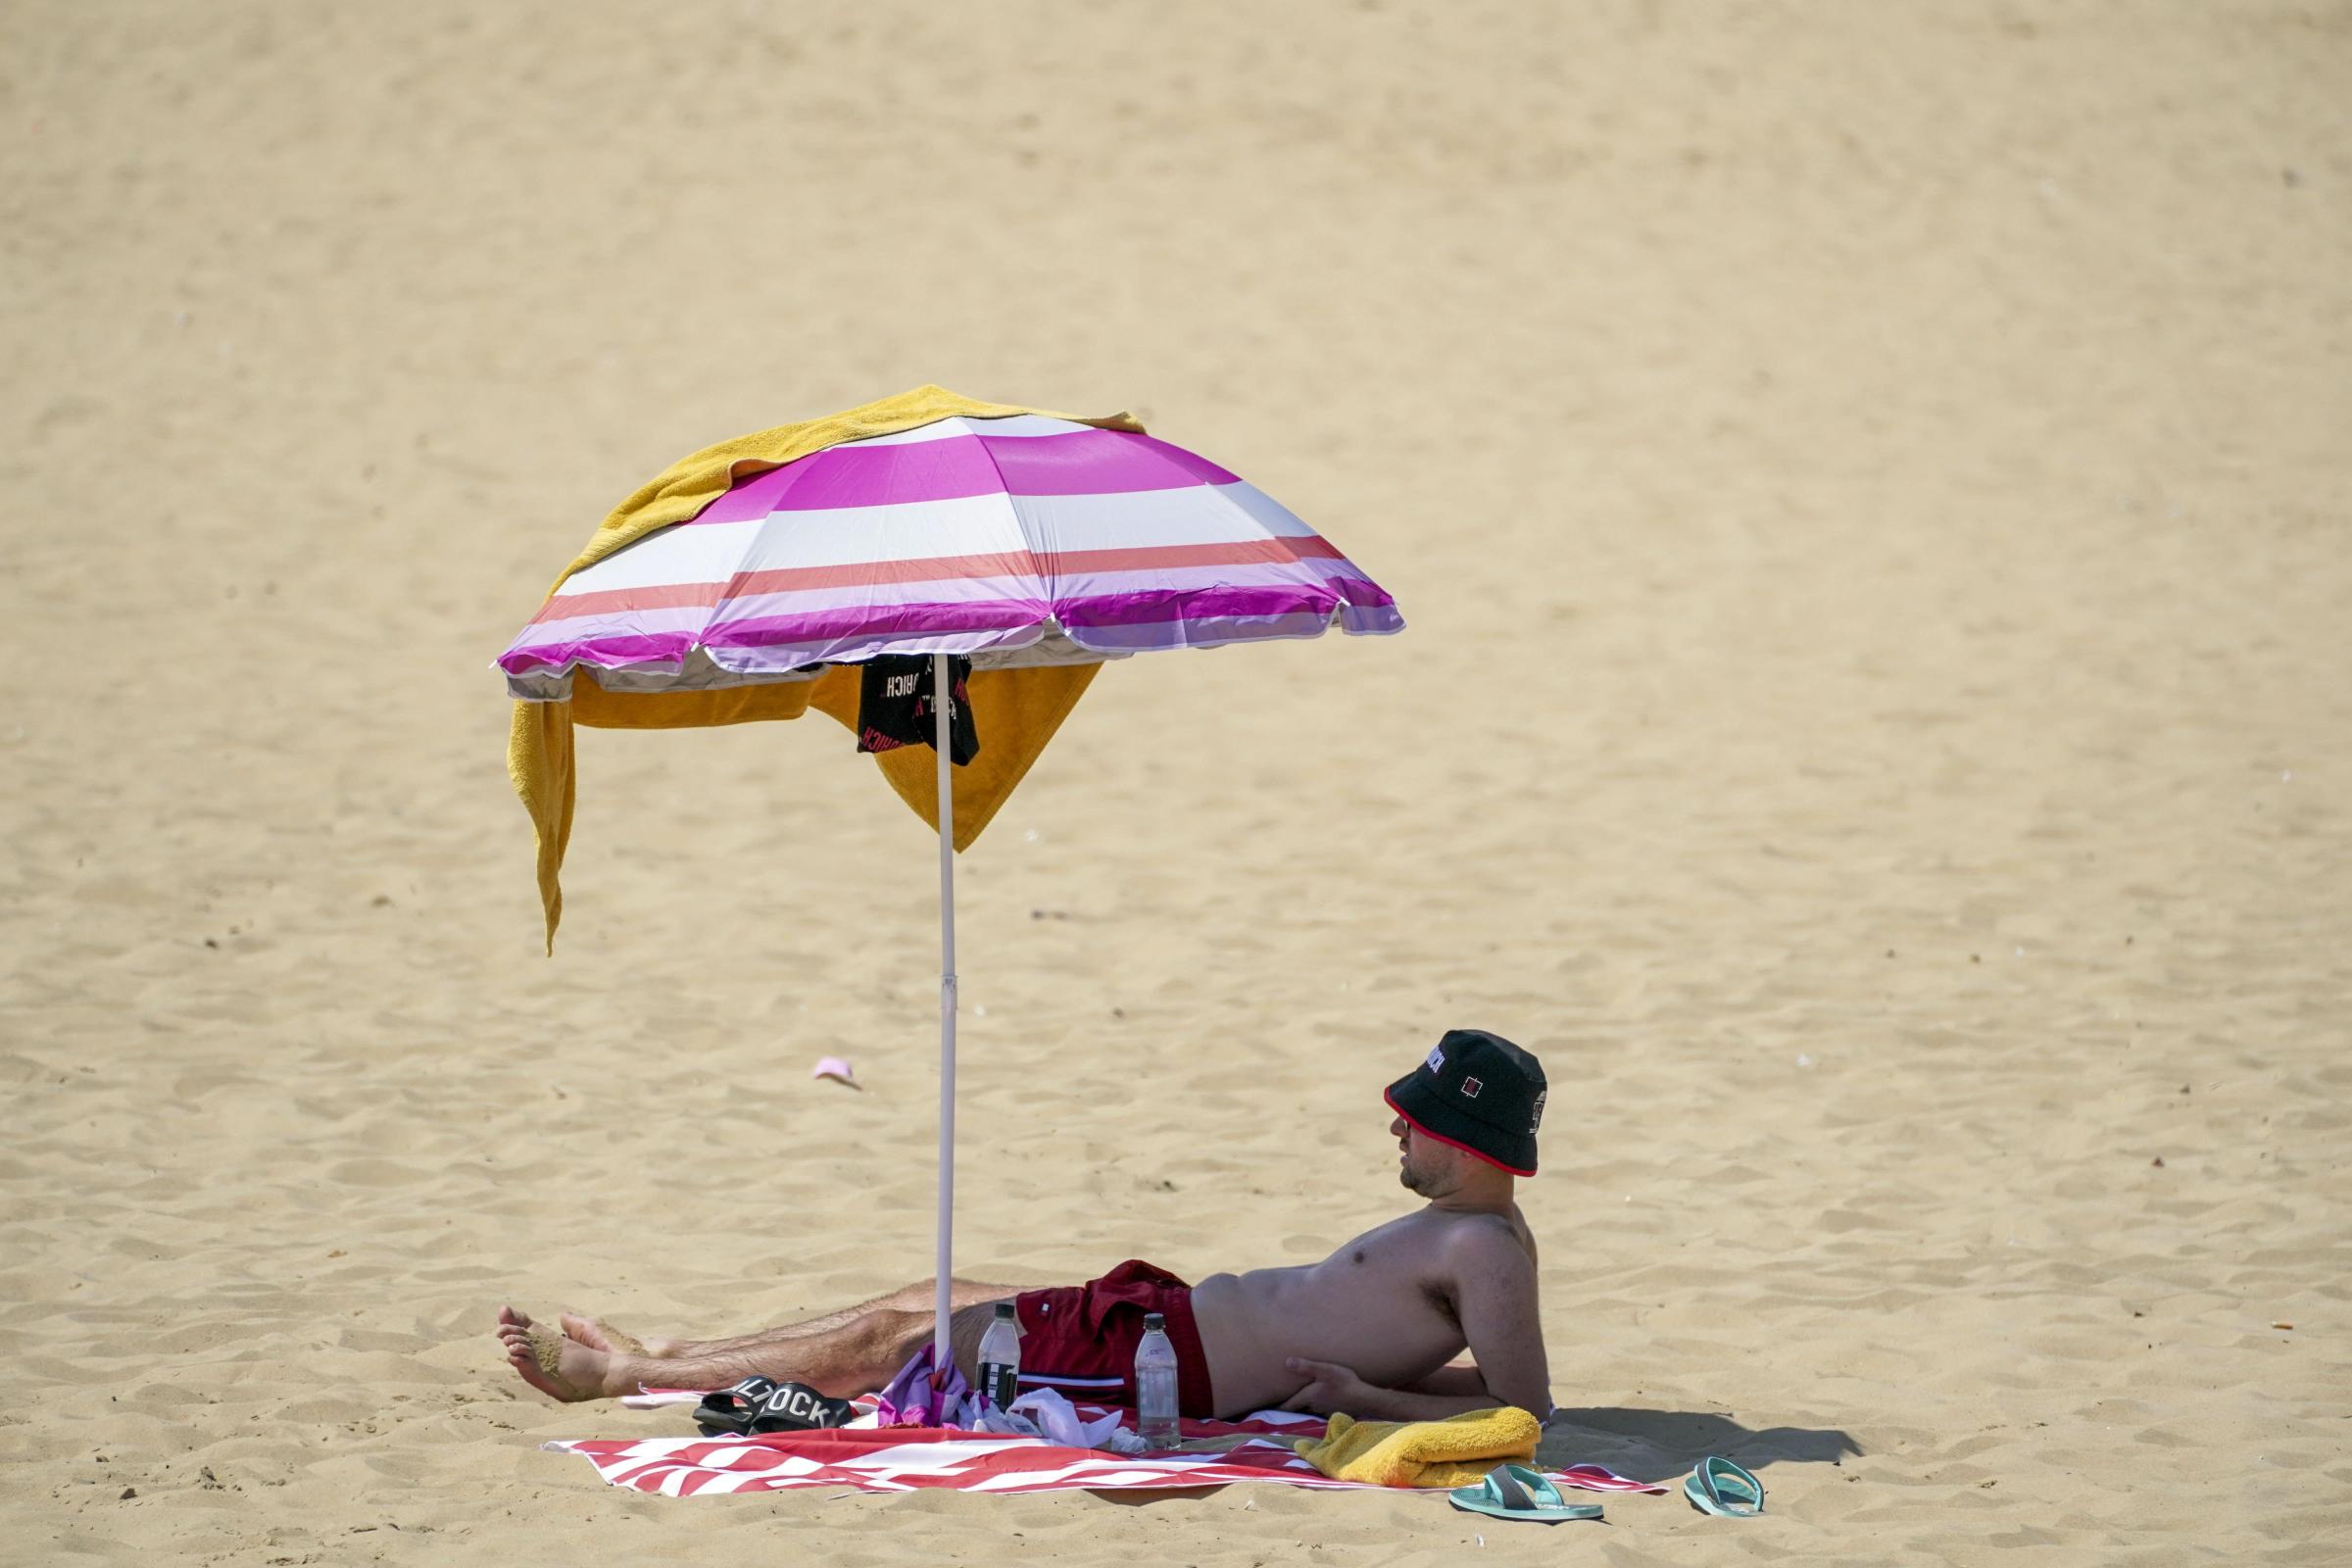 Scotland could see record temperatures as UK swelters in heatwave News and Star